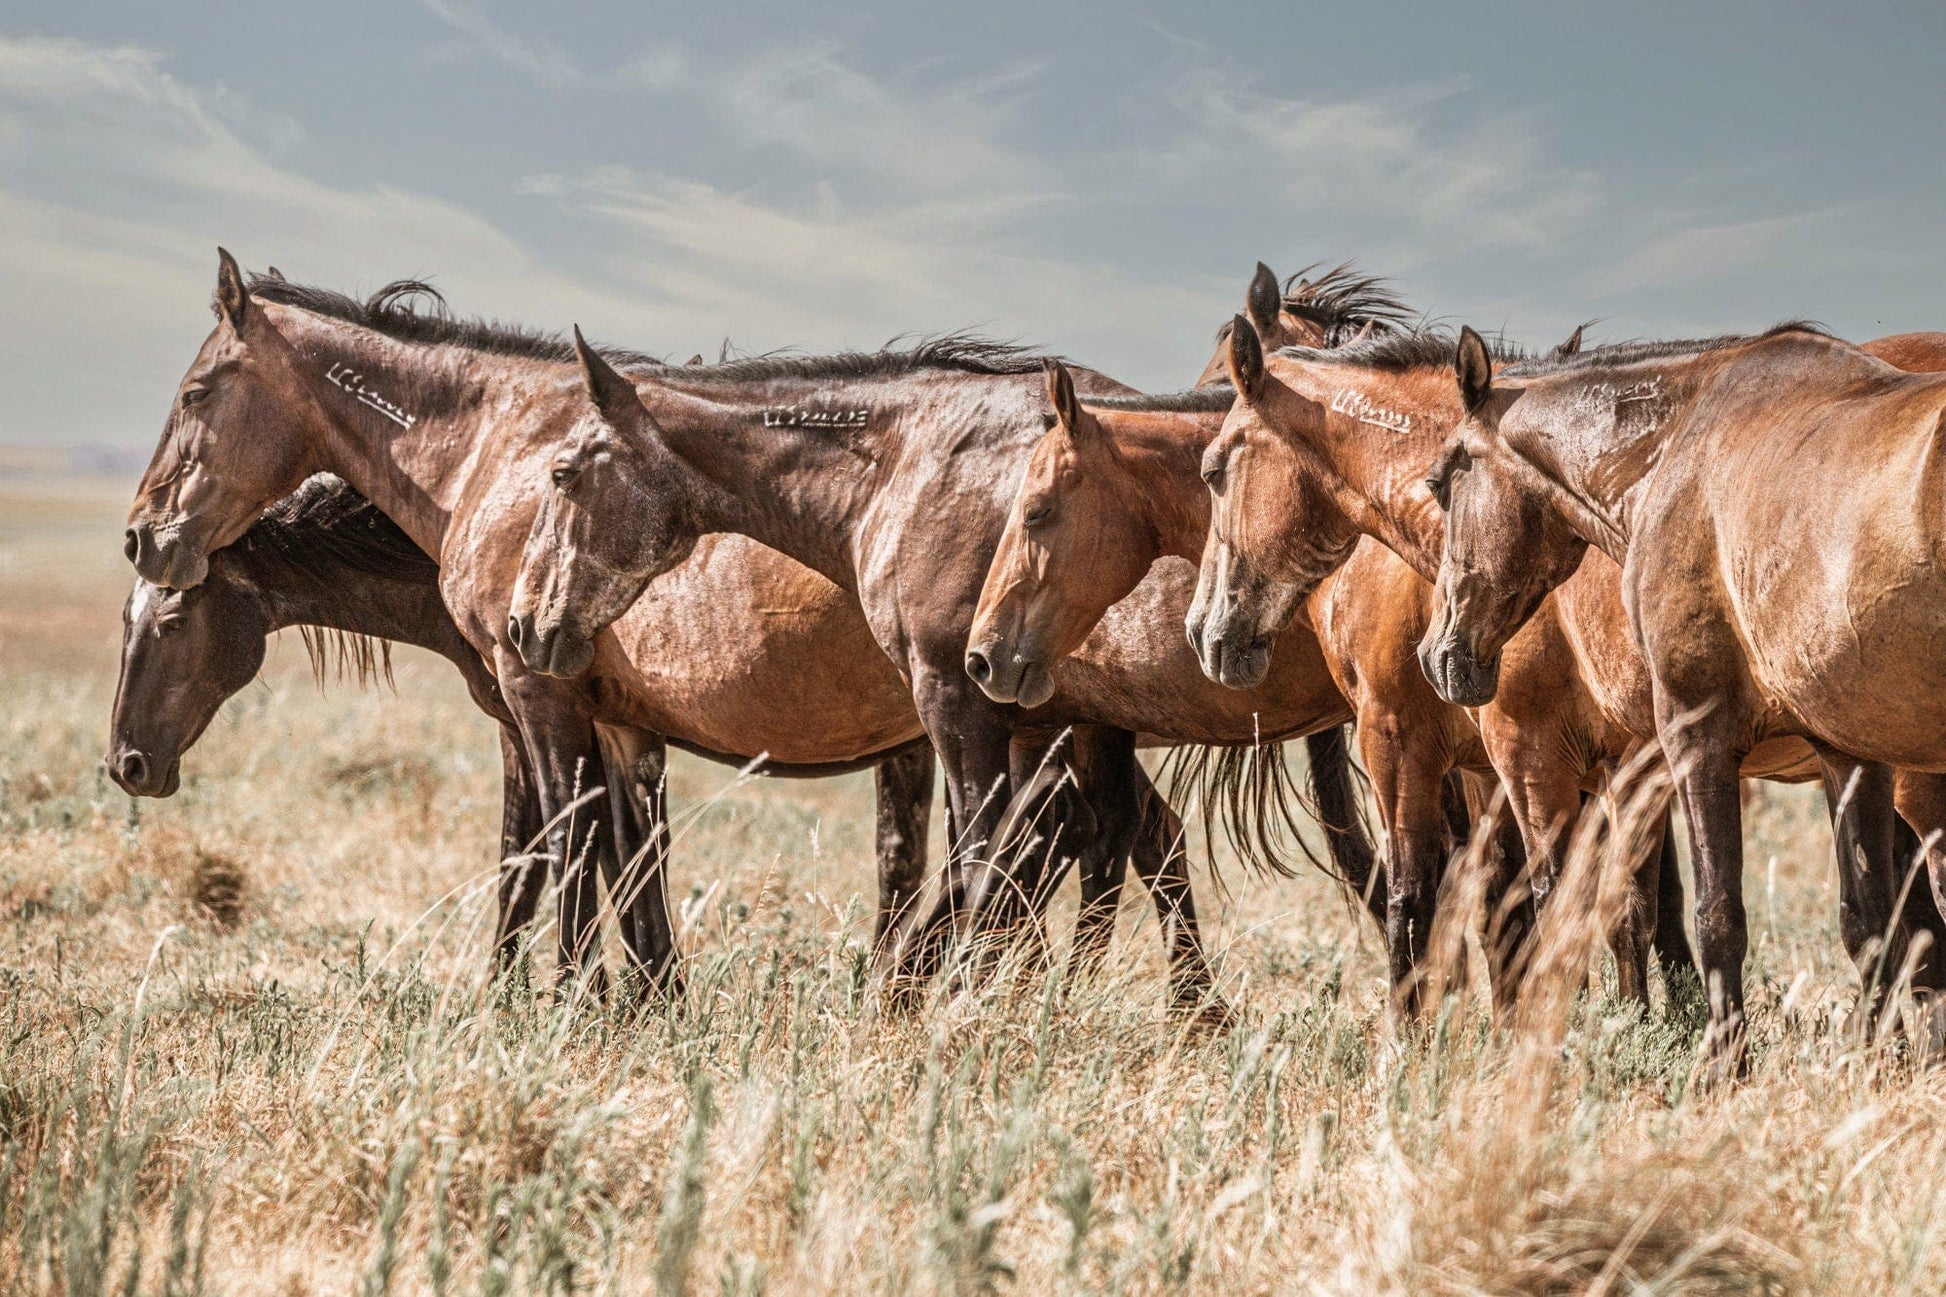 Teri James Photography Wall Art Paper Photo Print / 12 x 18 Inches Oklahoma Wild Horses of the Osage - Western Wall Decor